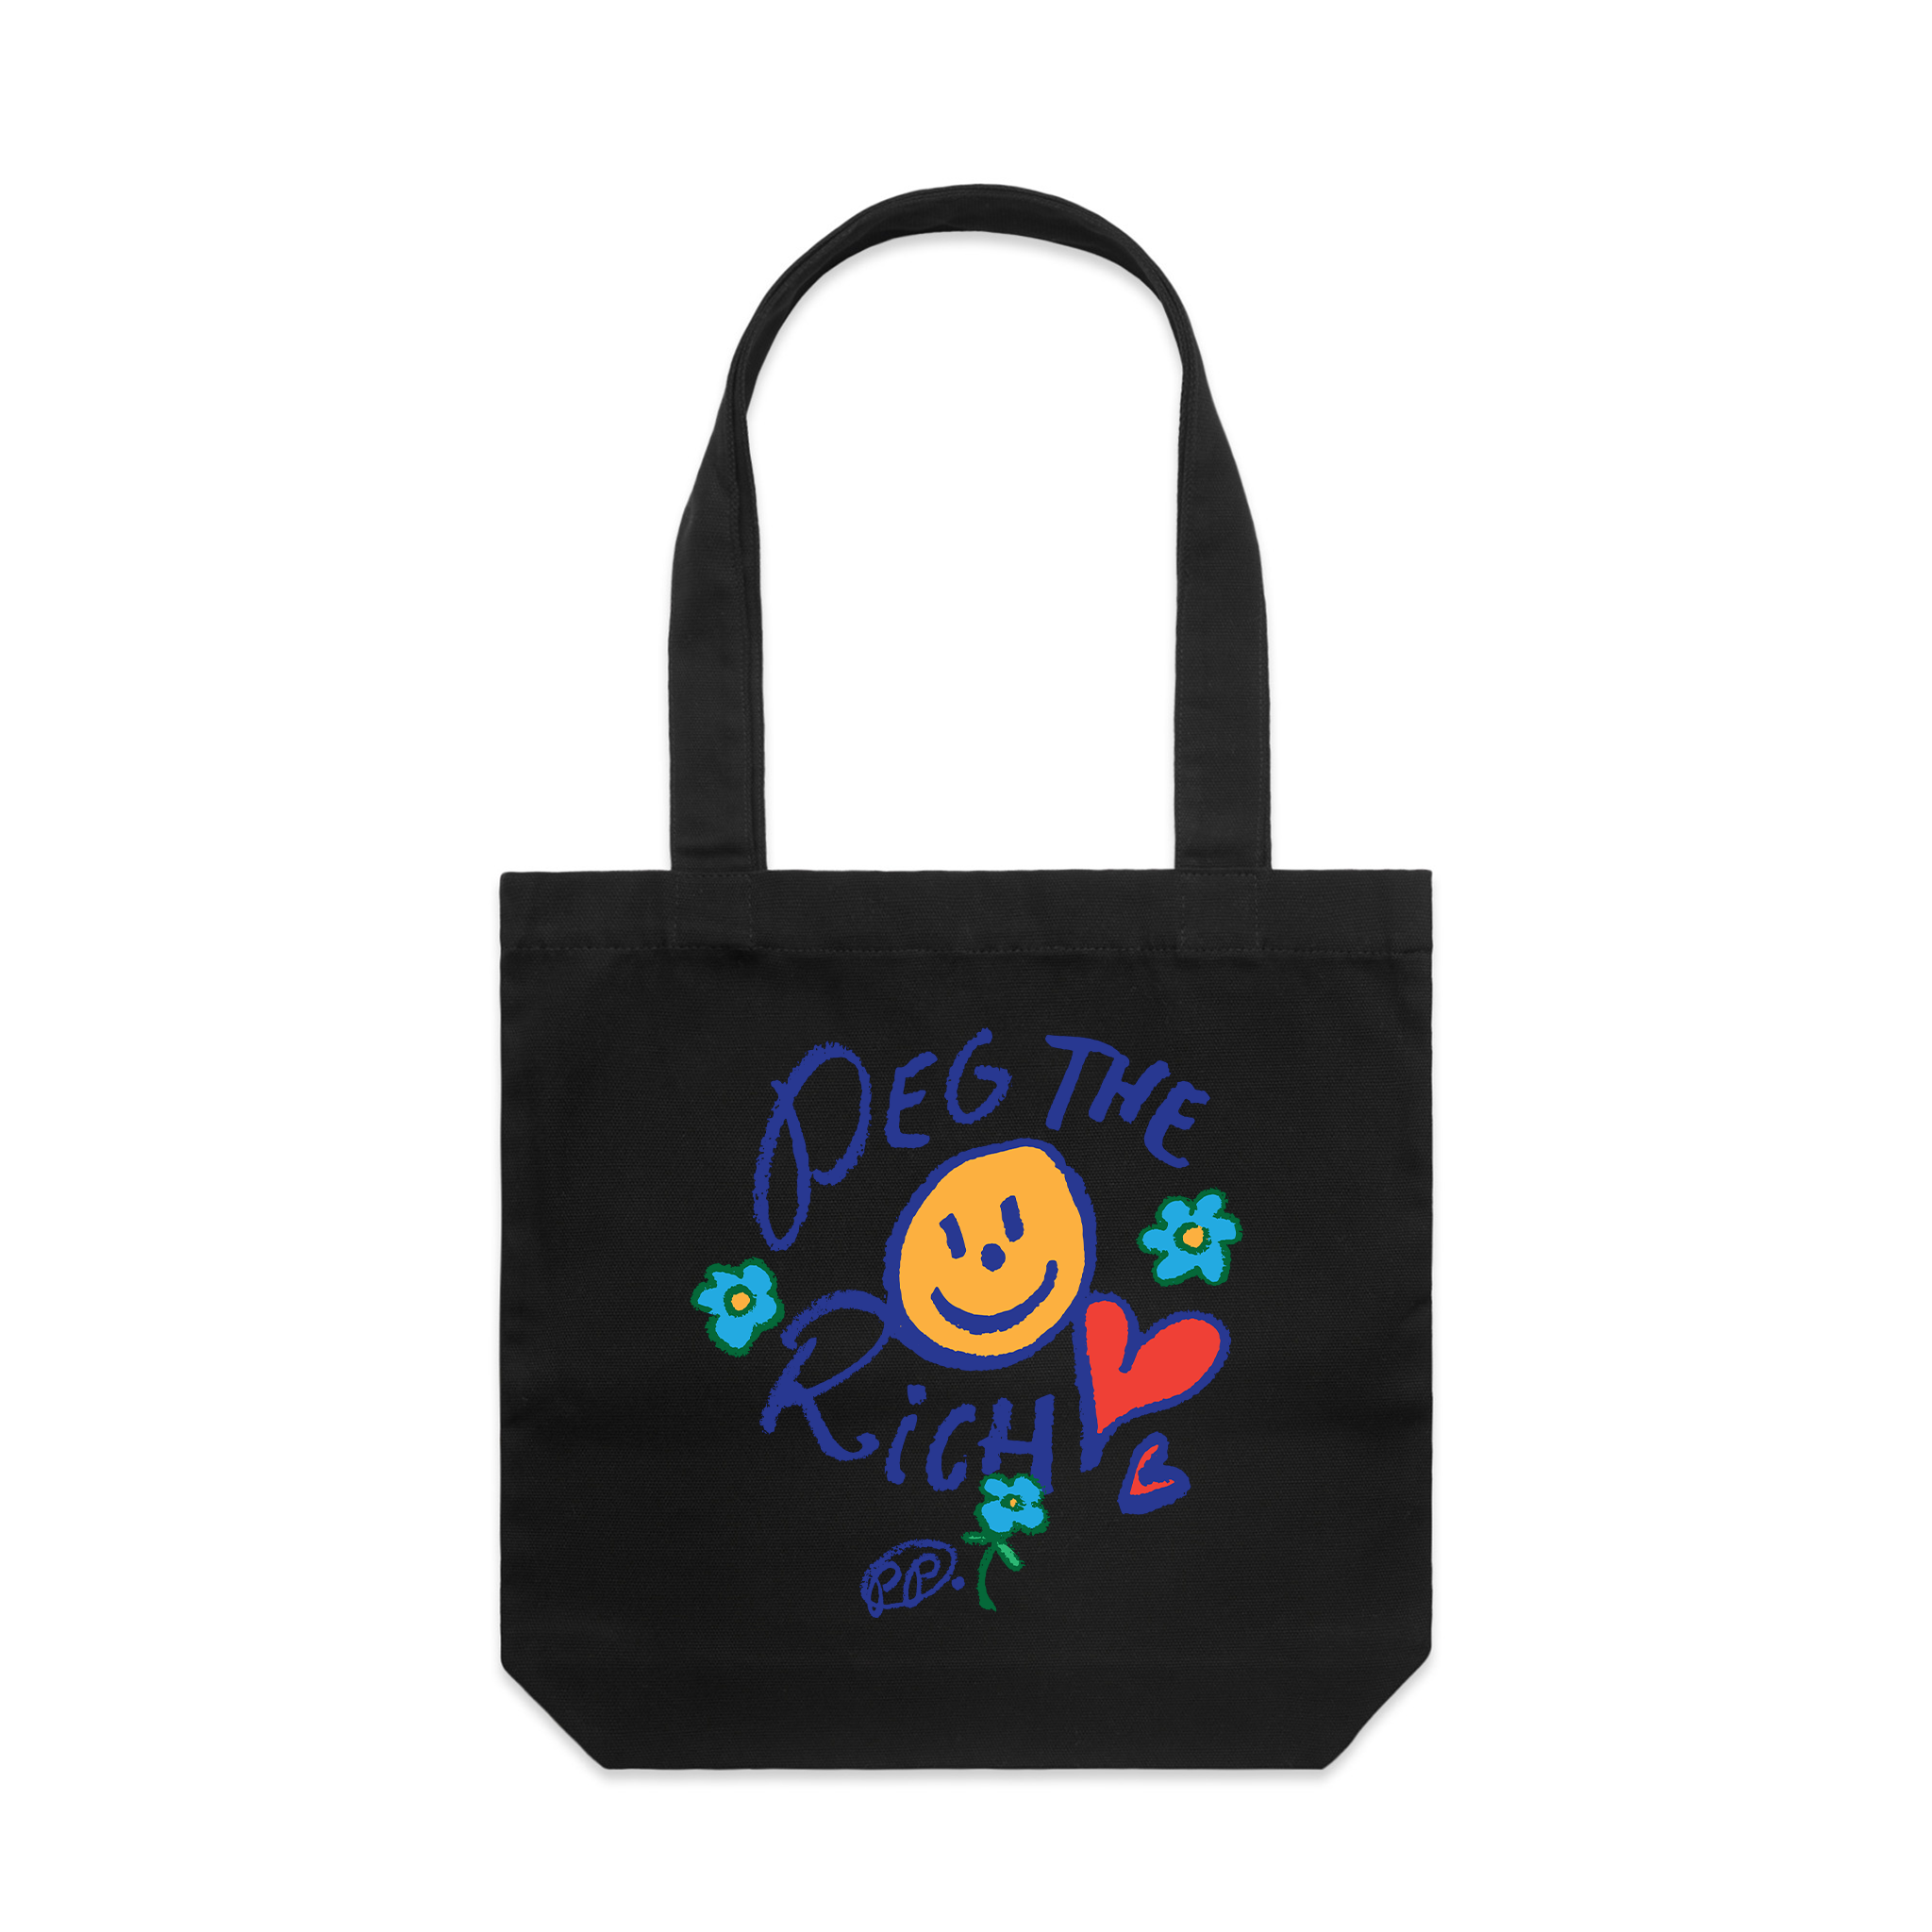 Smiley Tote